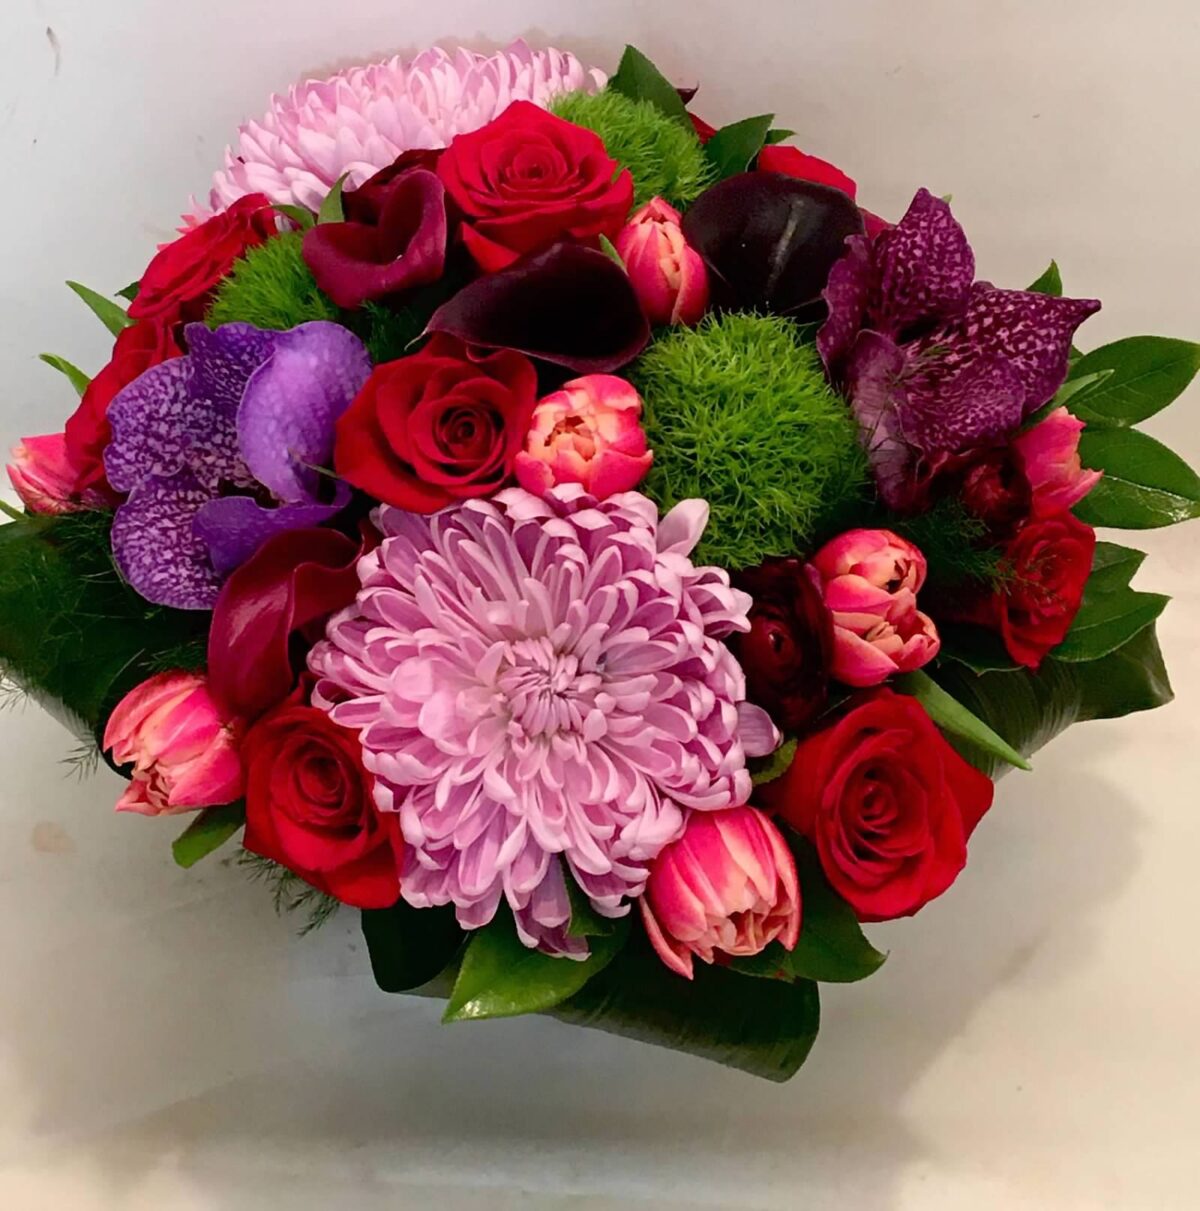 concierge-flowers-delivery-nyc-162